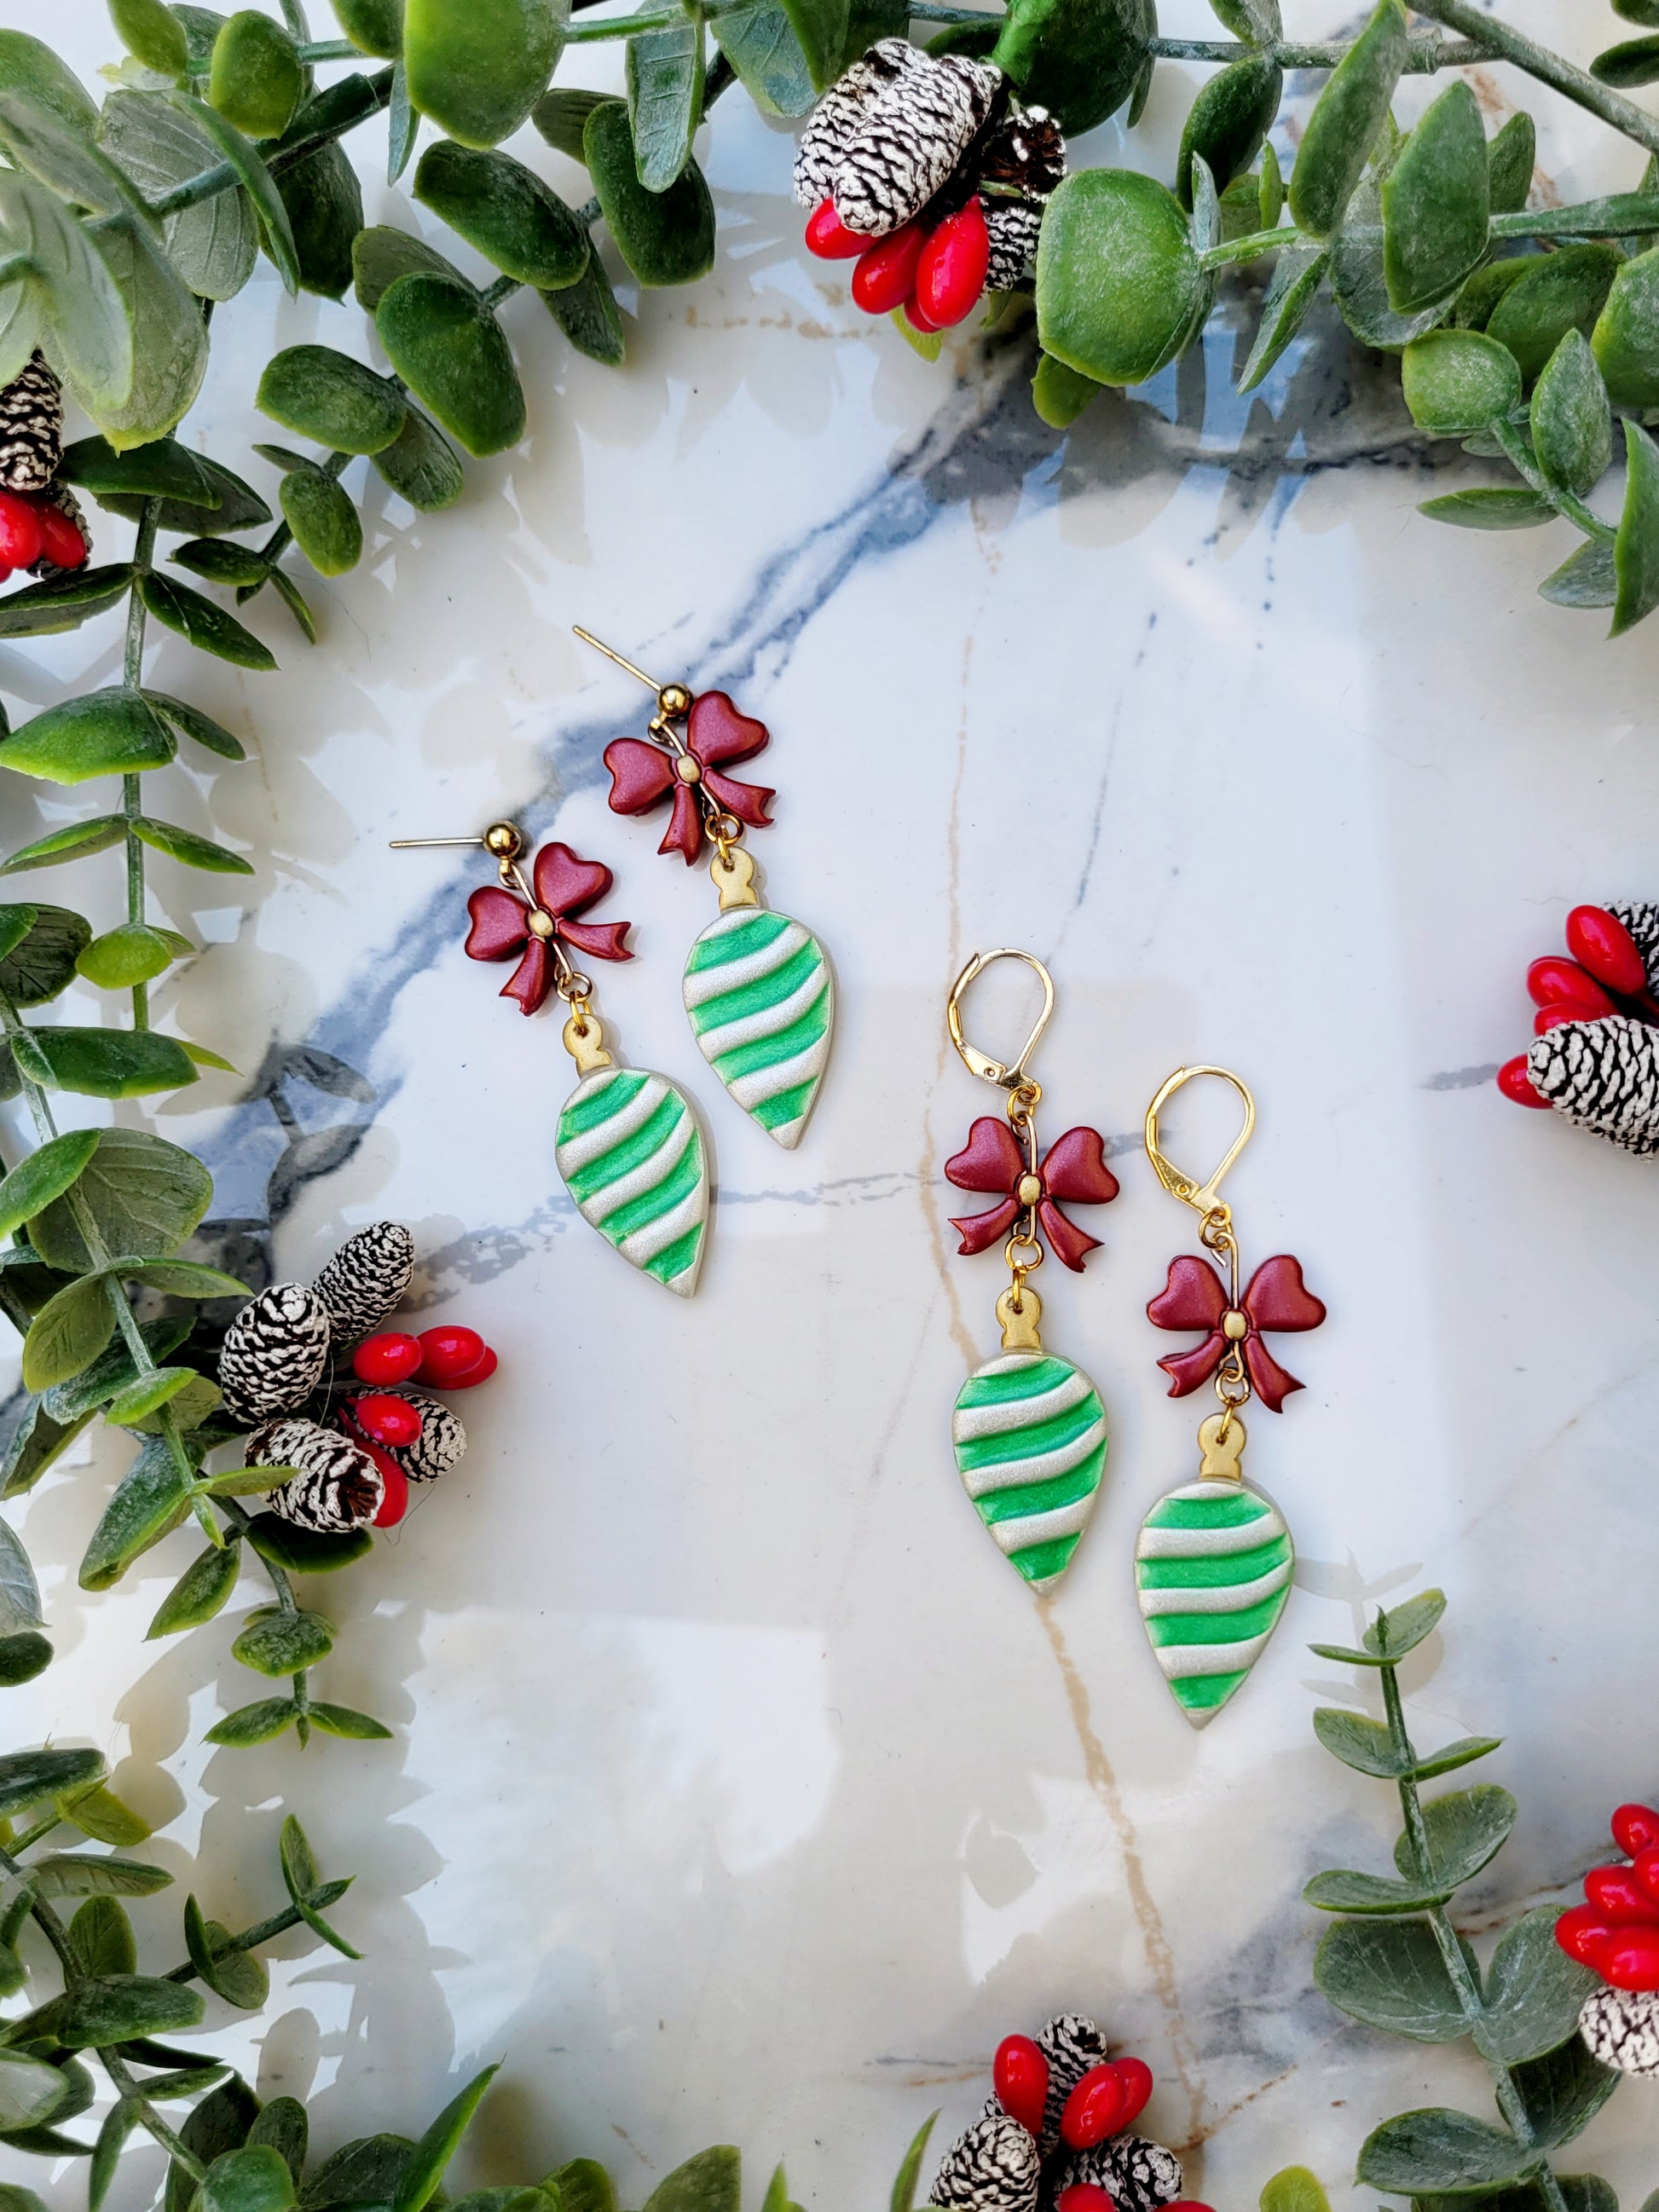 retro ornament style earrings on a marble background surrounded by foliage. 